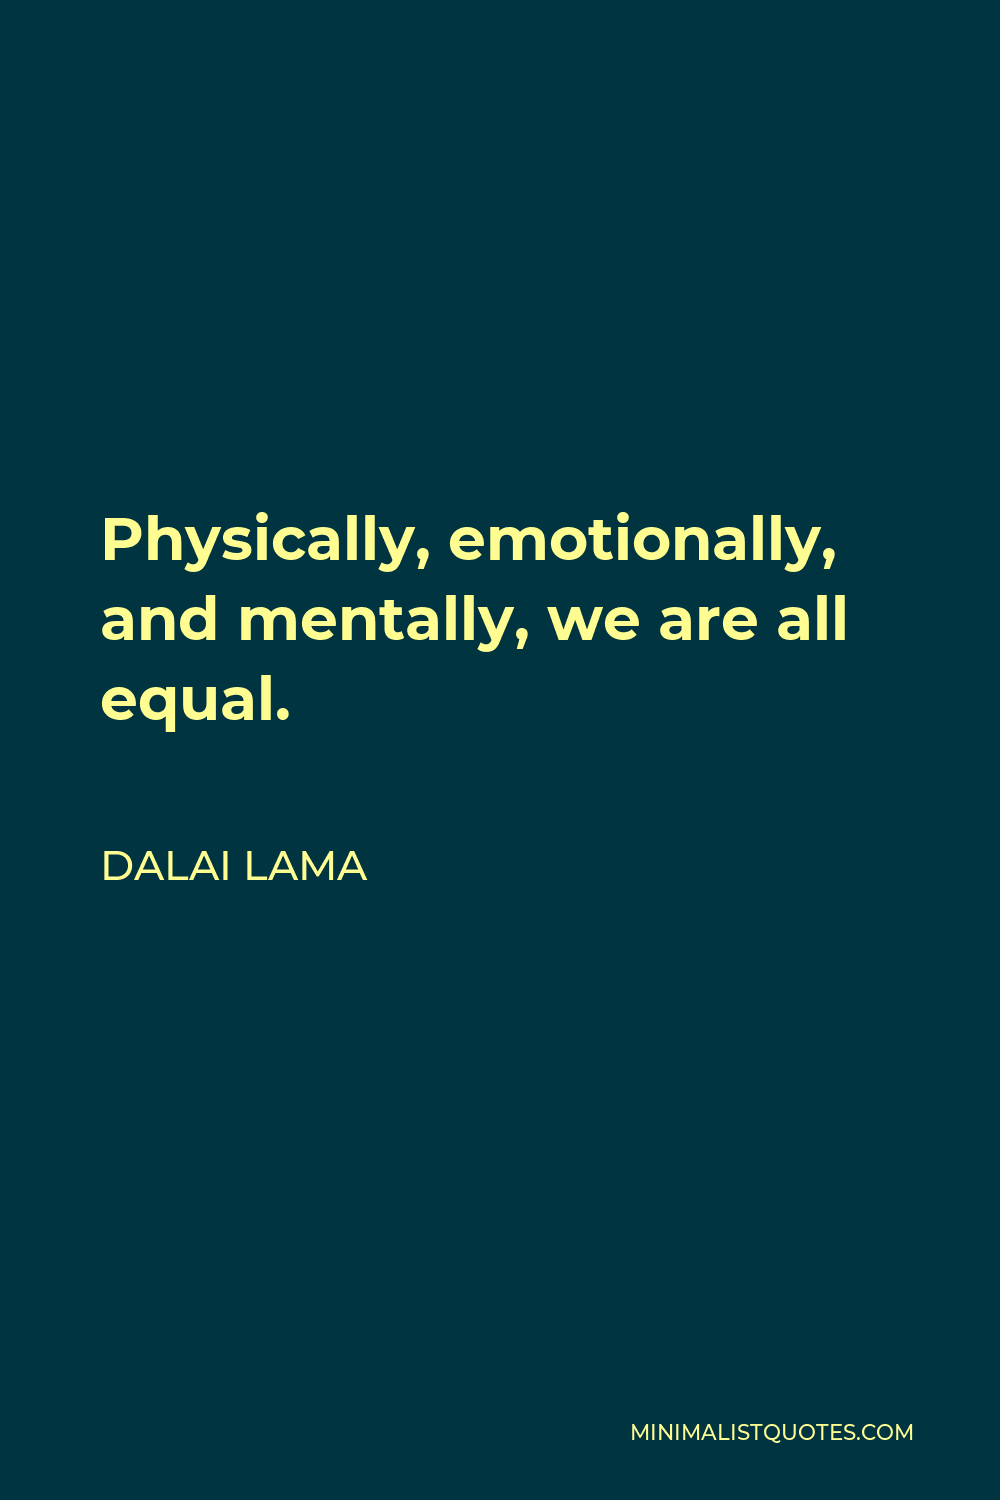 Dalai Lama Quote - Physically, emotionally, and mentally, we are all equal.